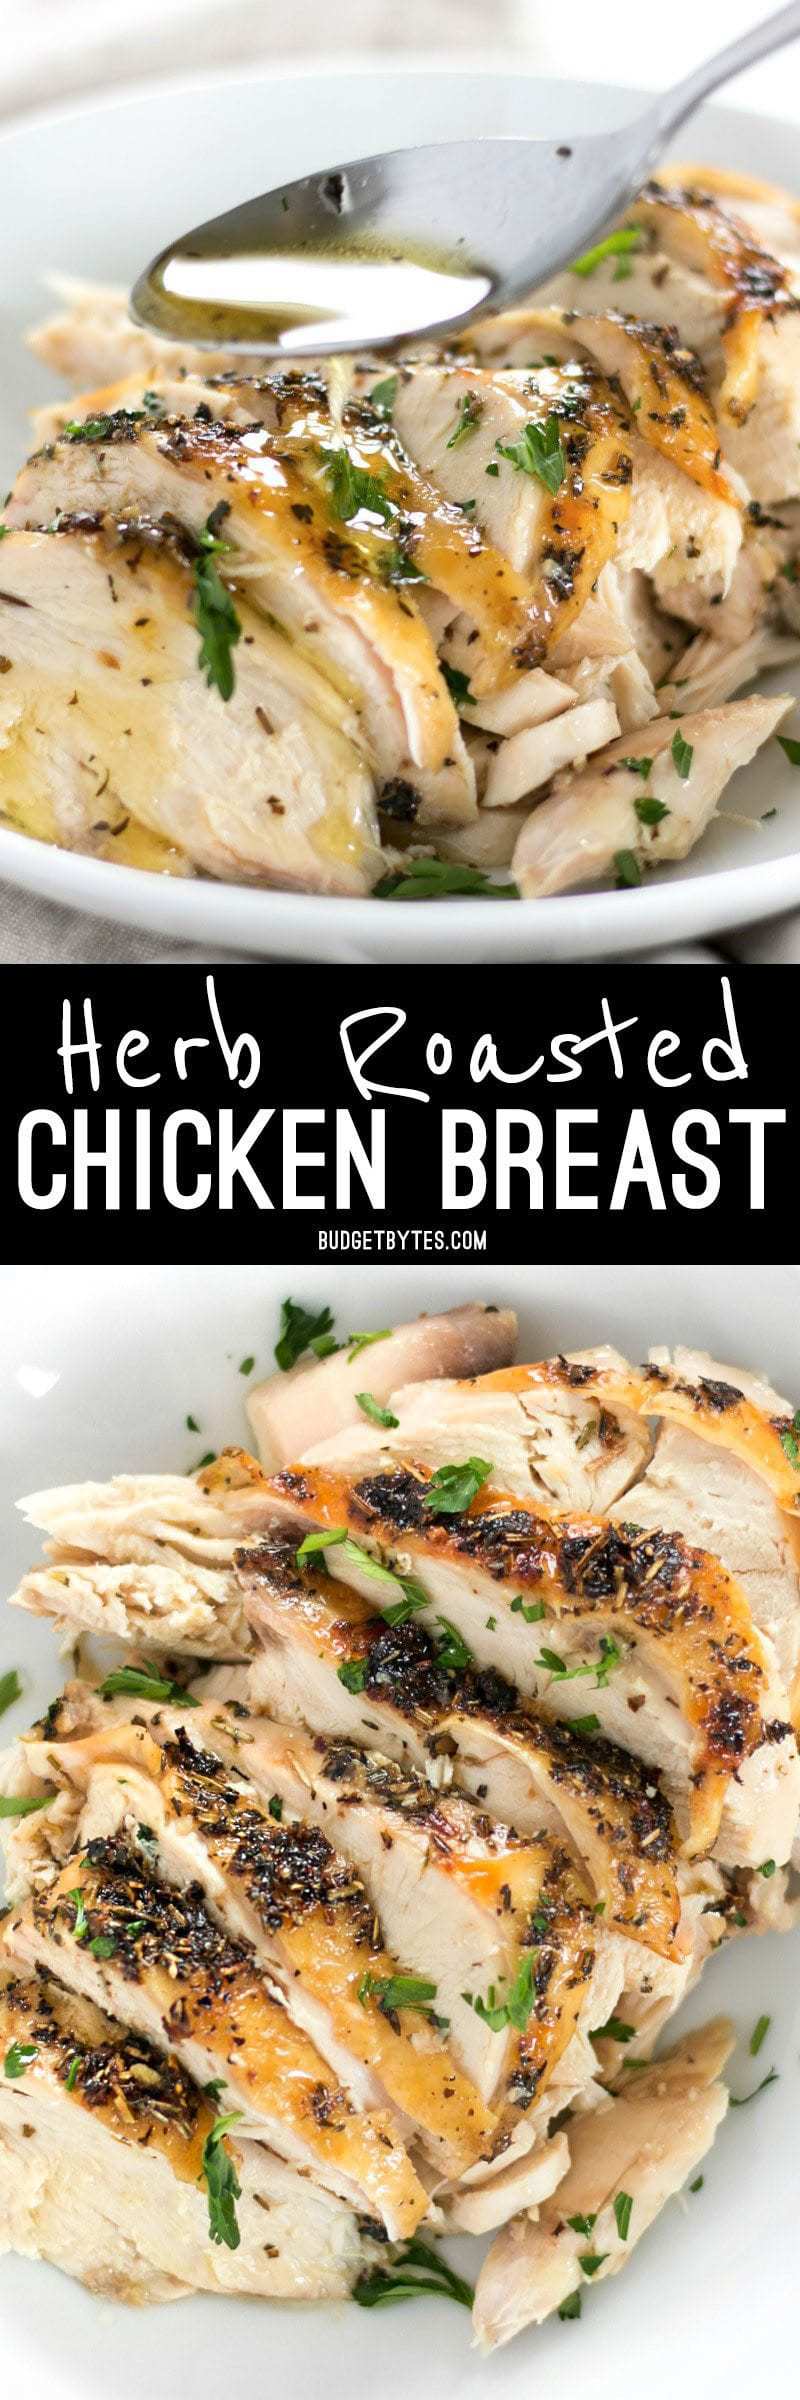 This juicy and tender Herb Roasted Chicken Breast is a breeze to make and is a great substitute for store bought rotisserie chicken. BudgetBytes.com